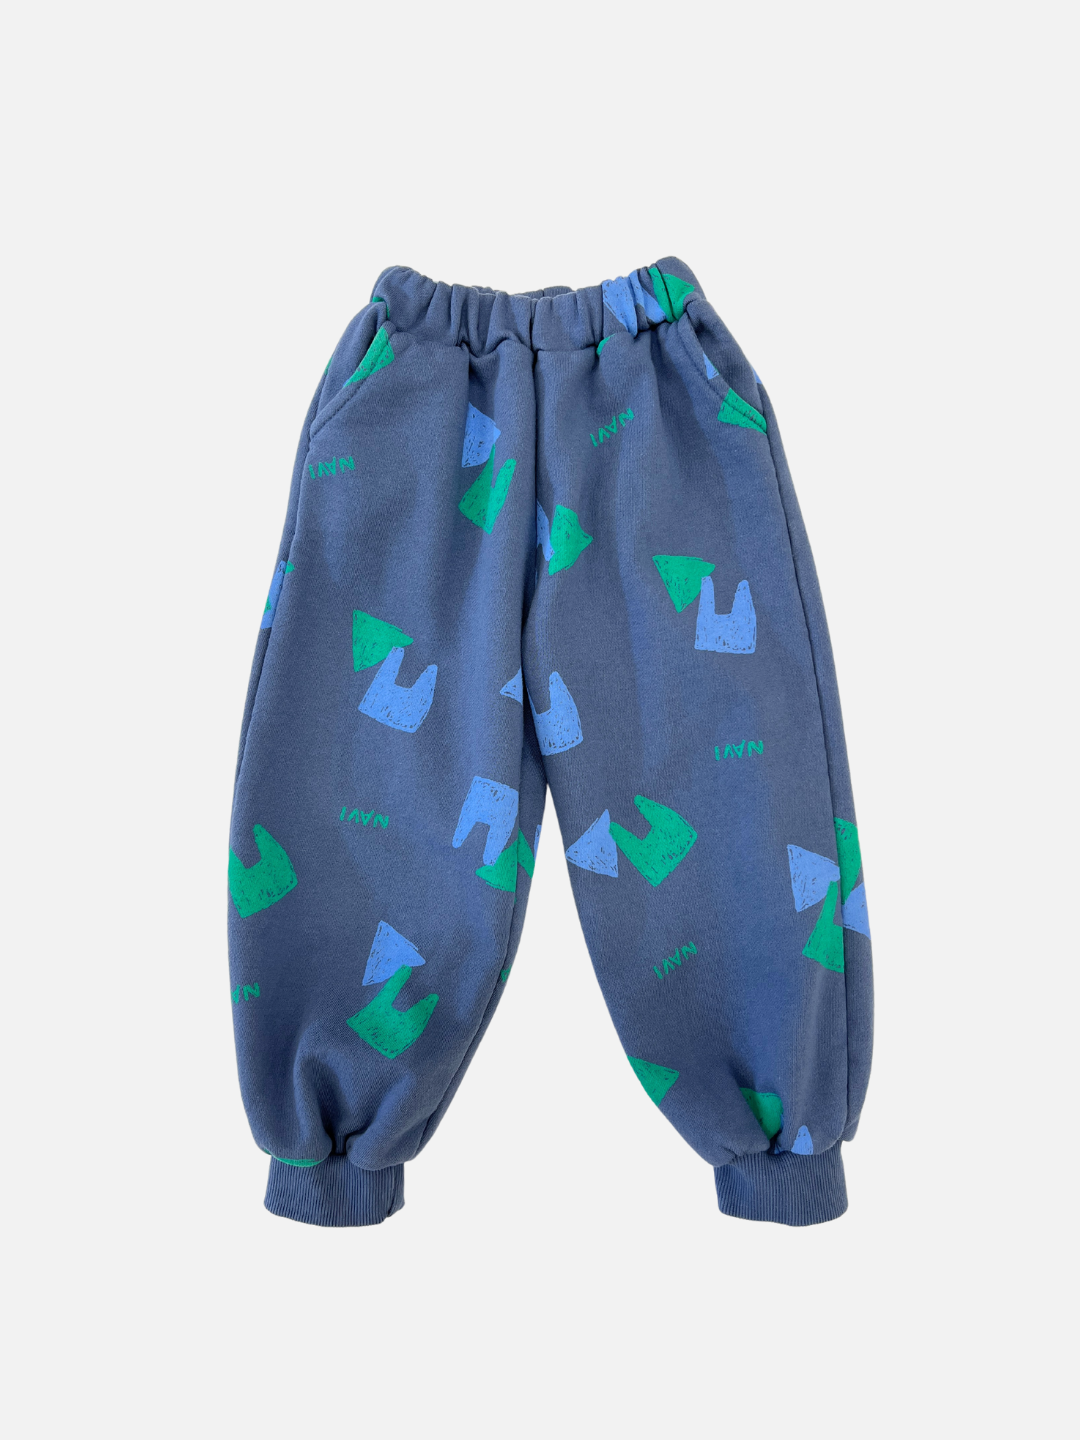 Front view of kids blue sweatpants with an all over pattern of green and blue shapes and the brand name Navi.